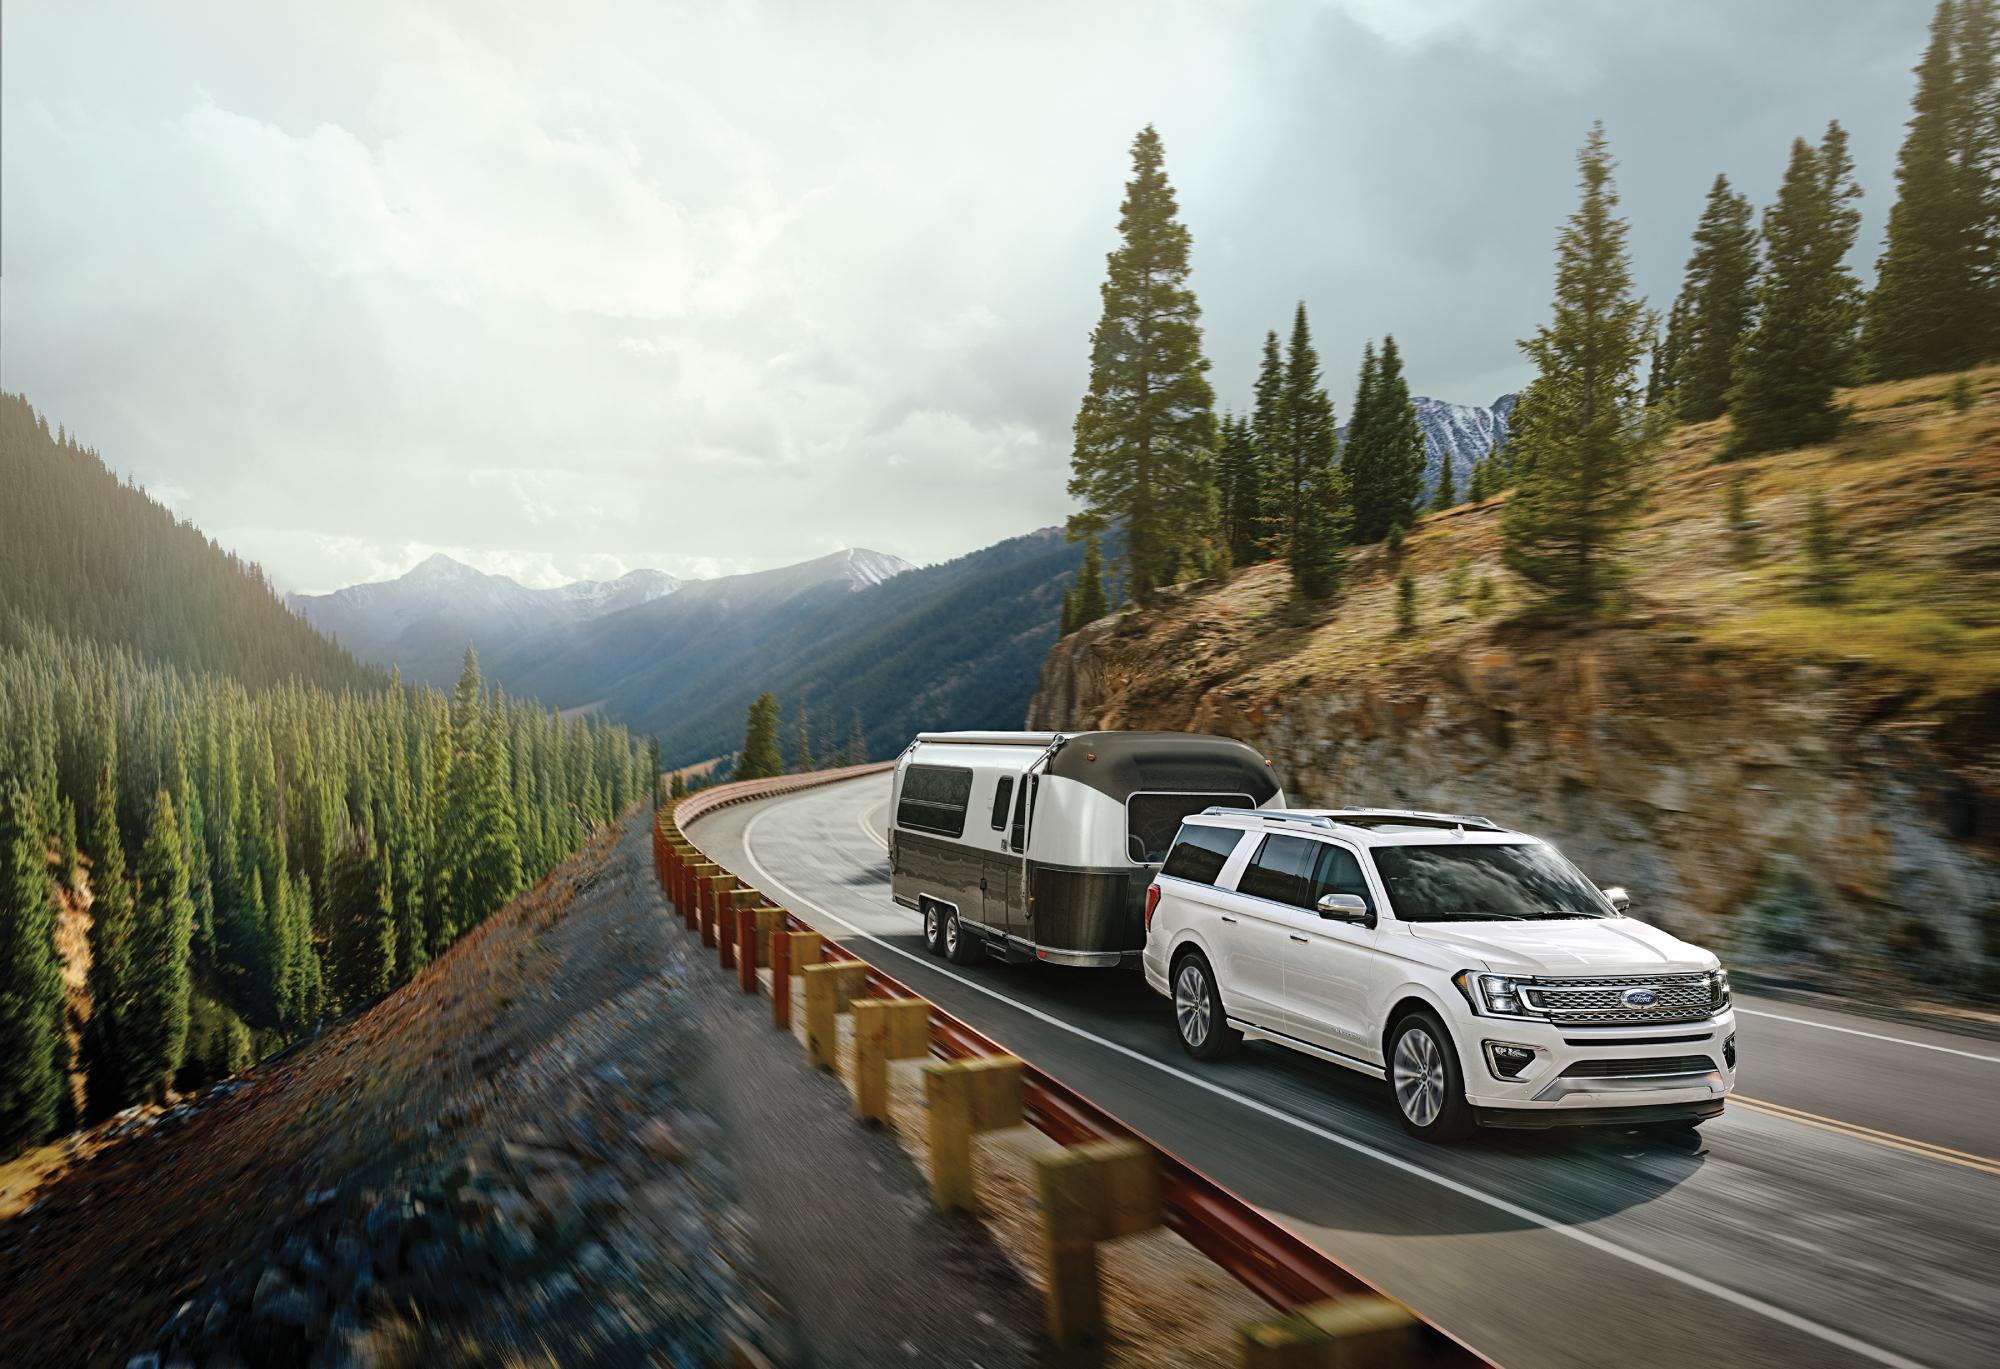 The 2021 Ford Expedition has great towing capacity, but the Chevy Suburban wins for overall cargo space.